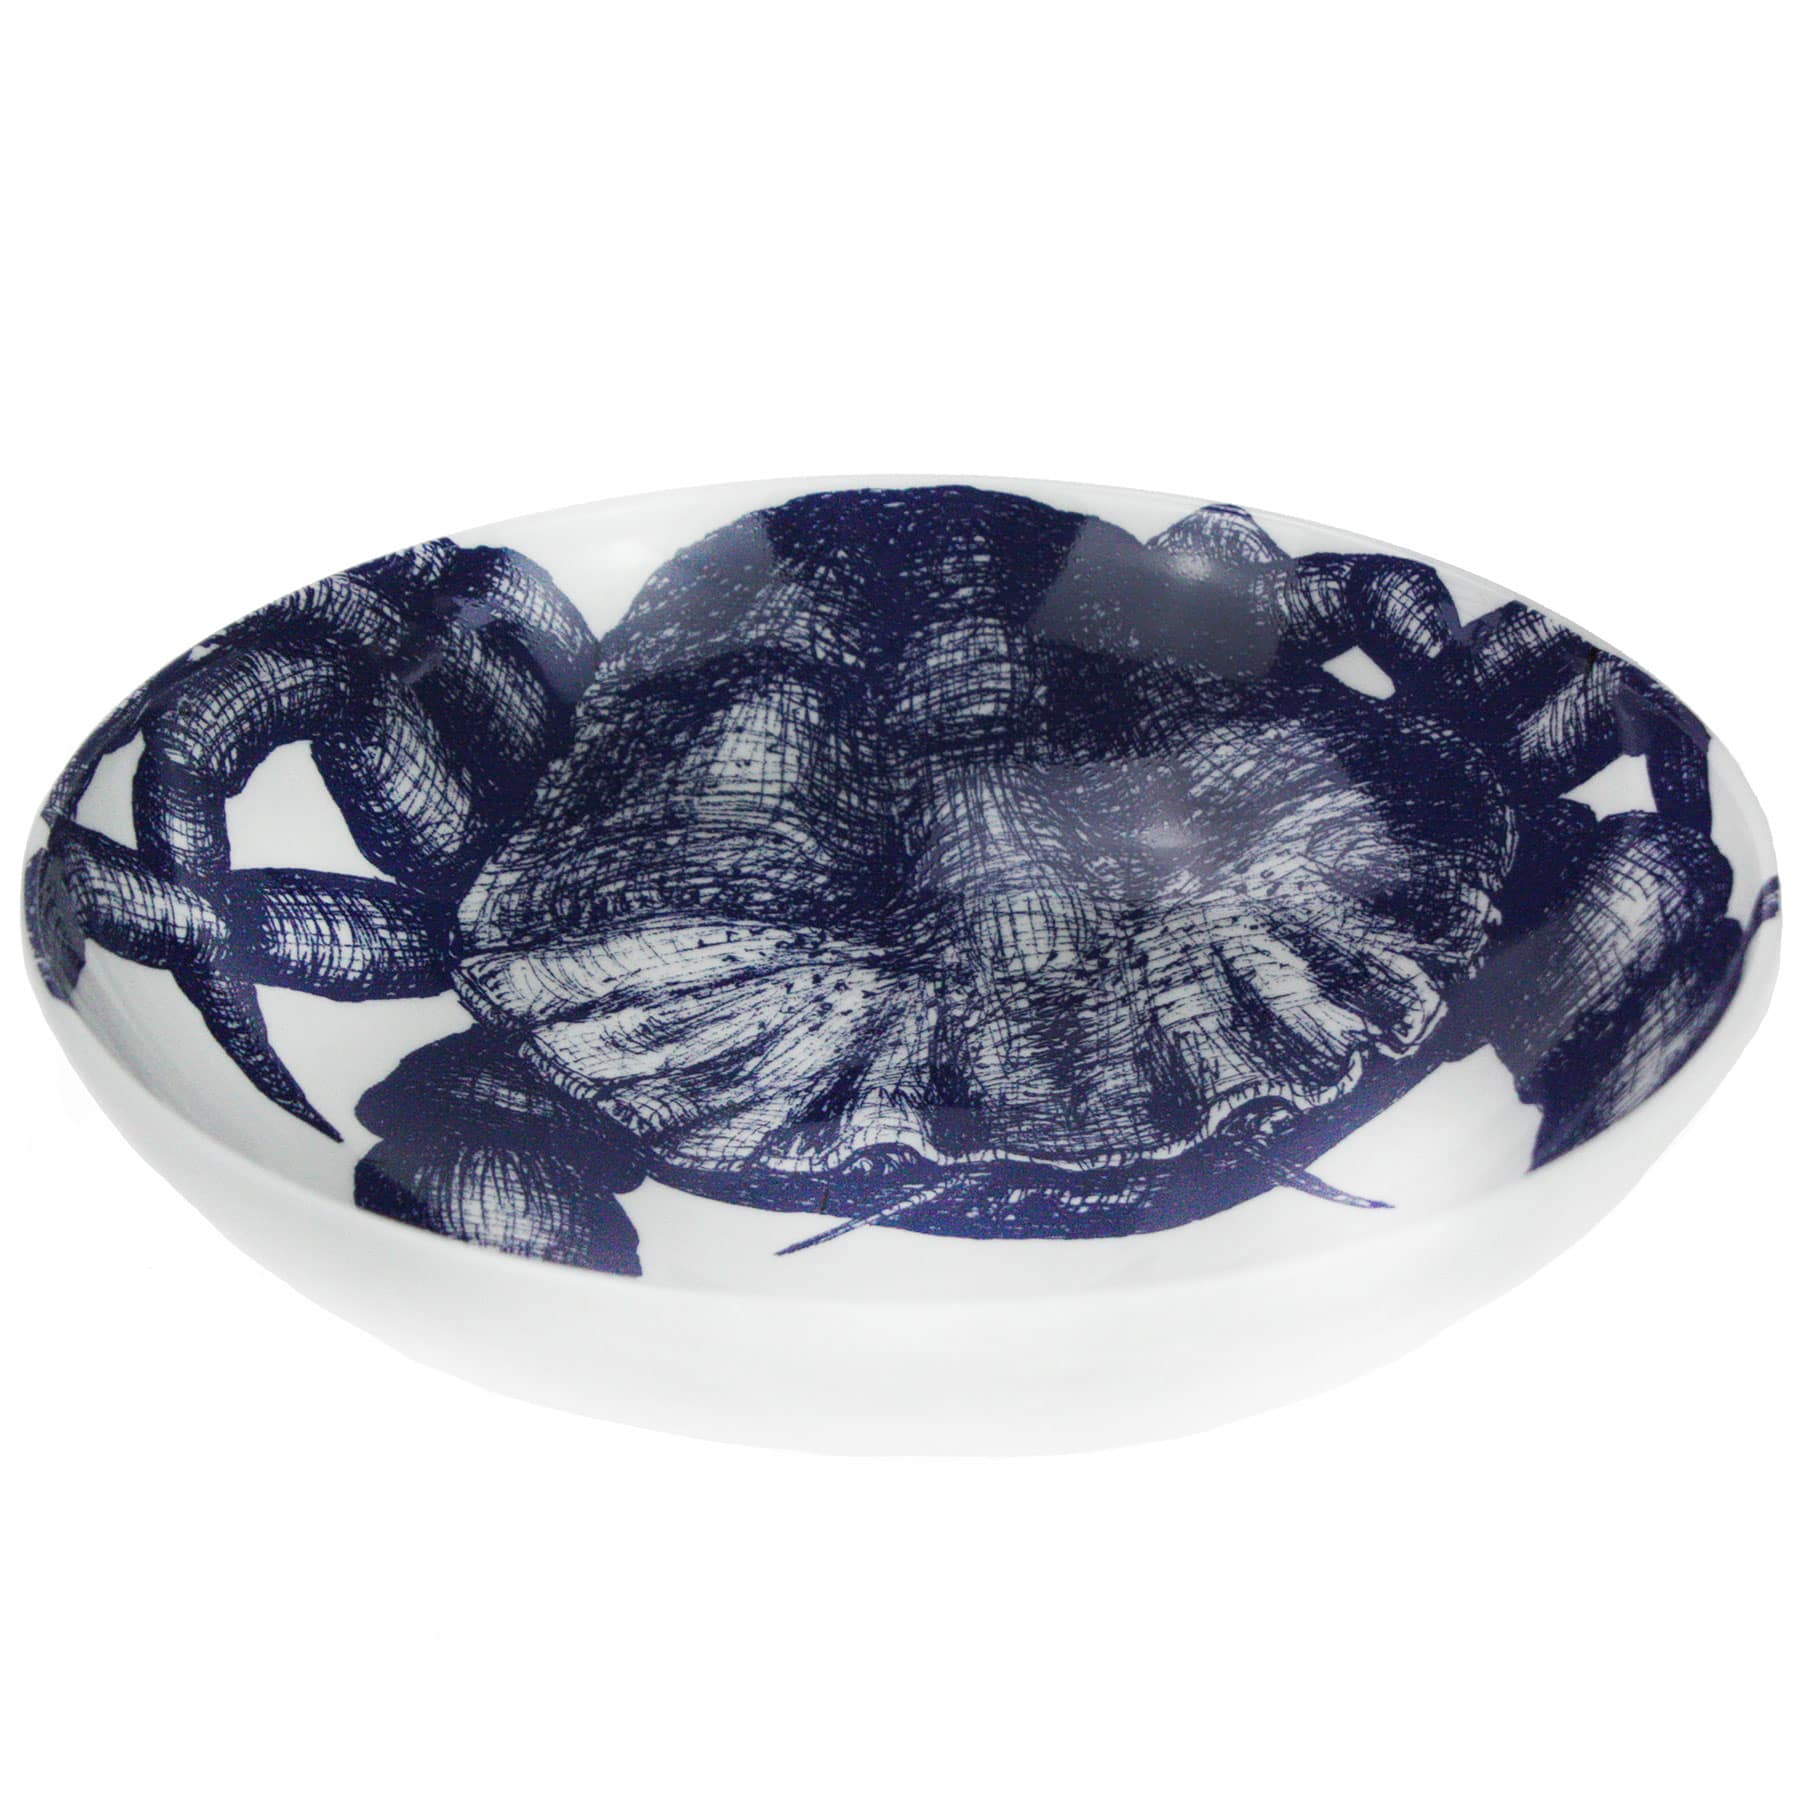 Pasta bowl in Bone China in our Classic range in Navy and white in the Crab design